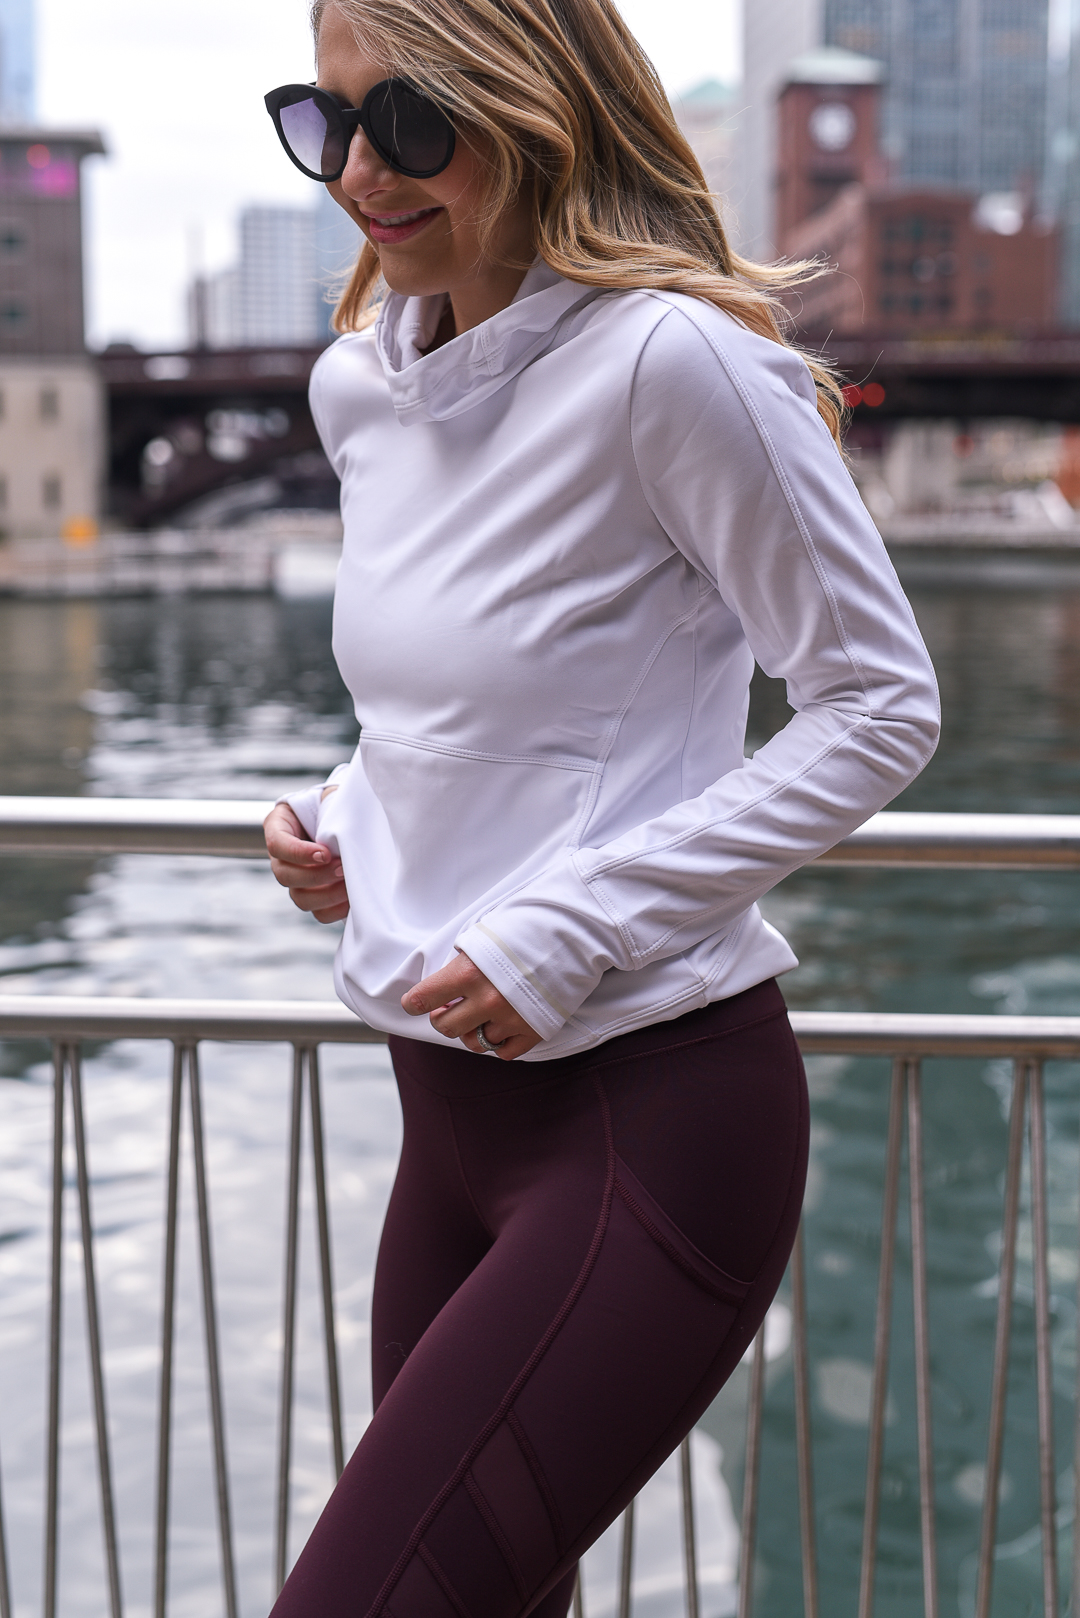 comfortable workout outerwear for winter